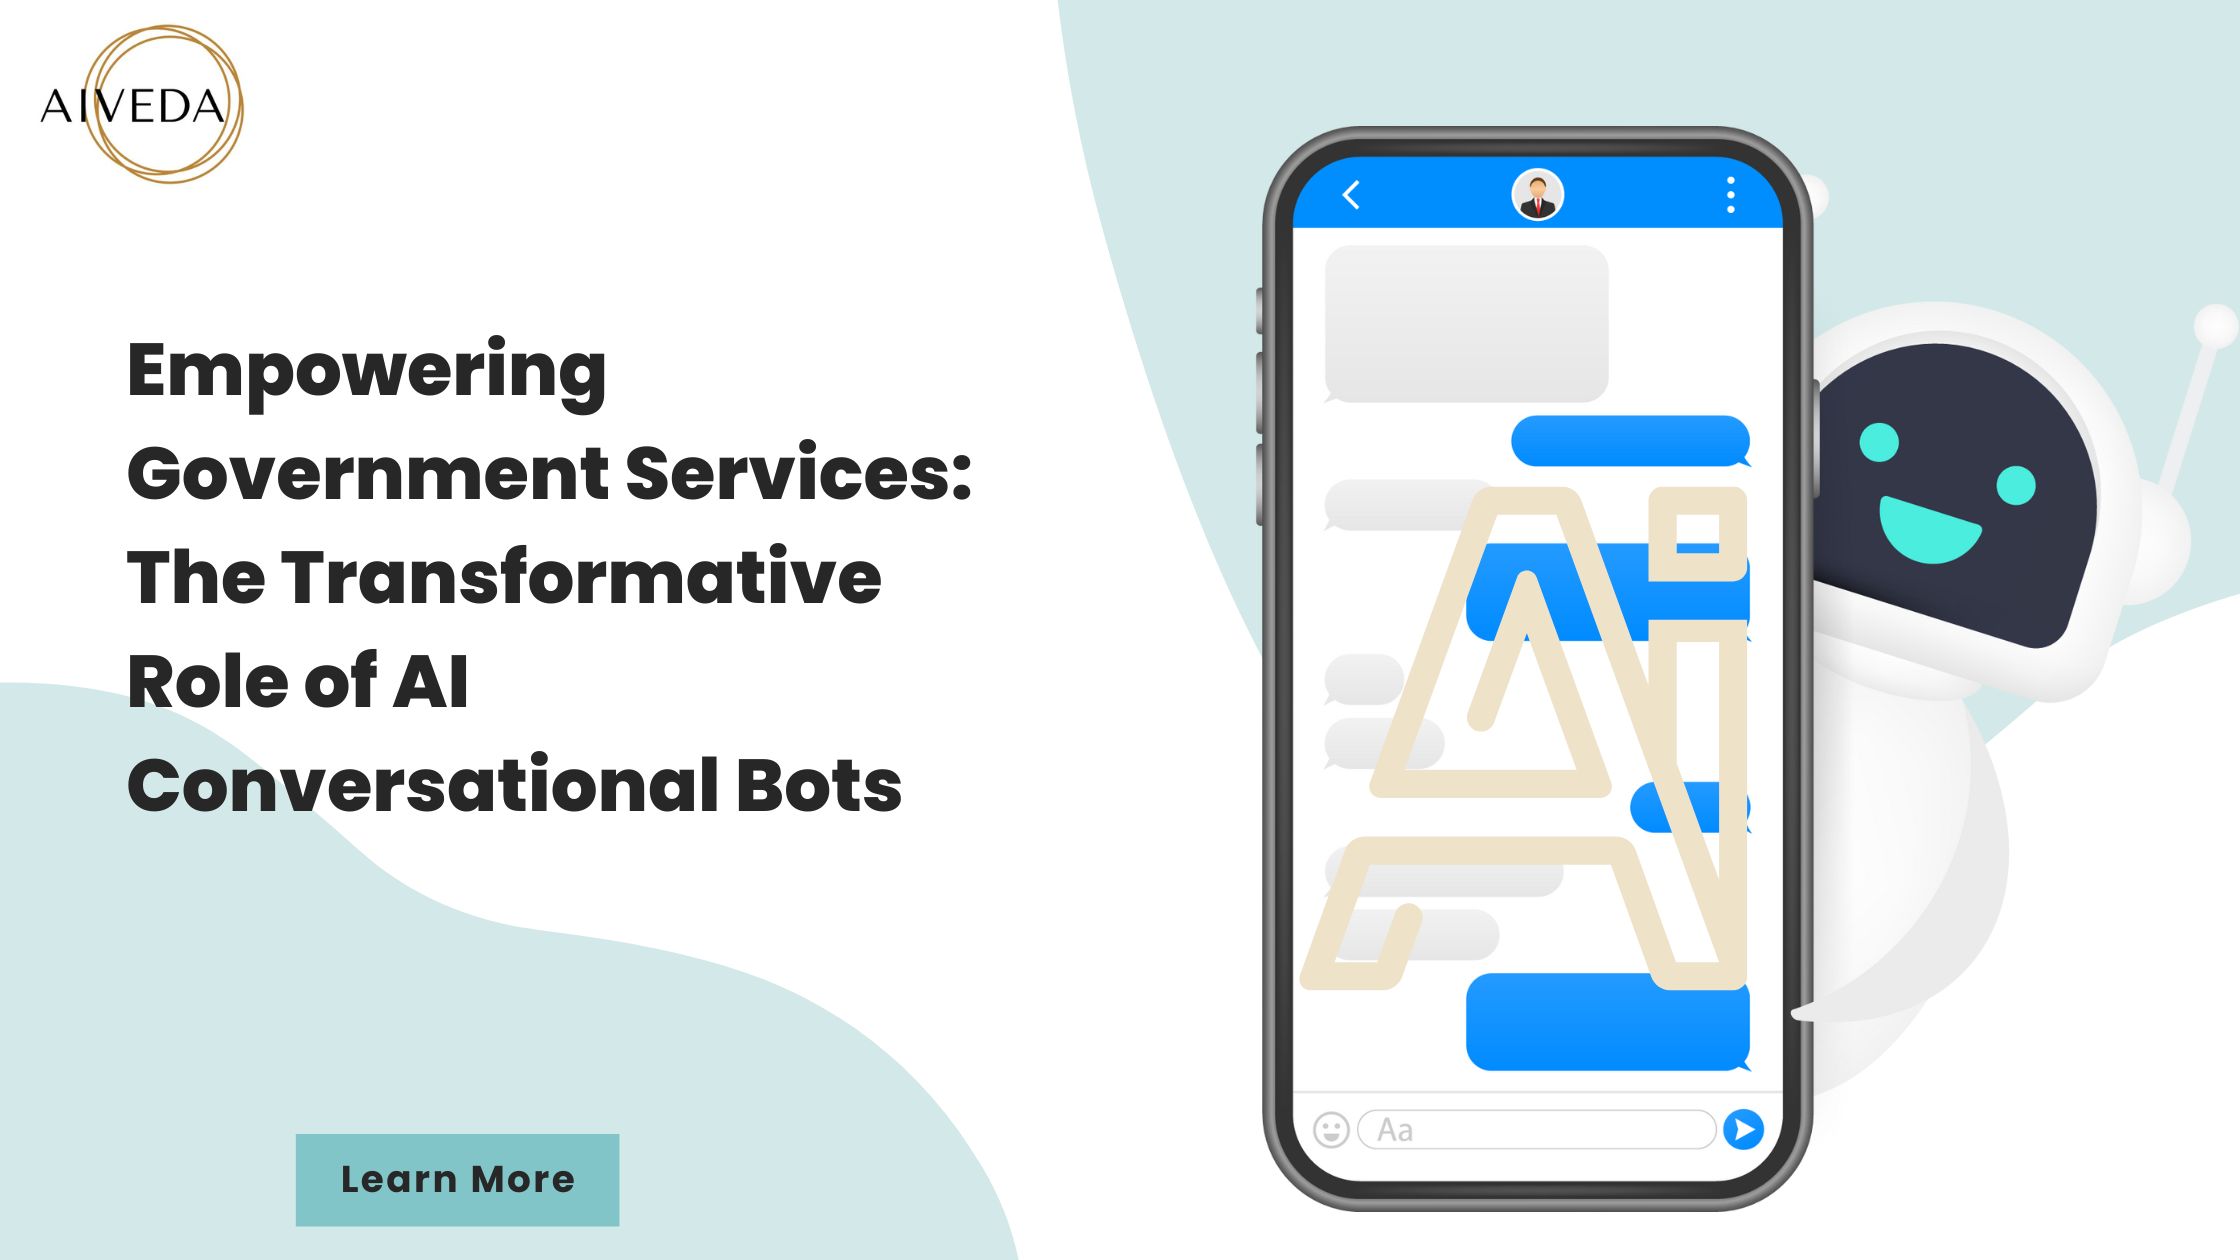 Empowering Government Services: The Transformative Role of AI Conversational Bots